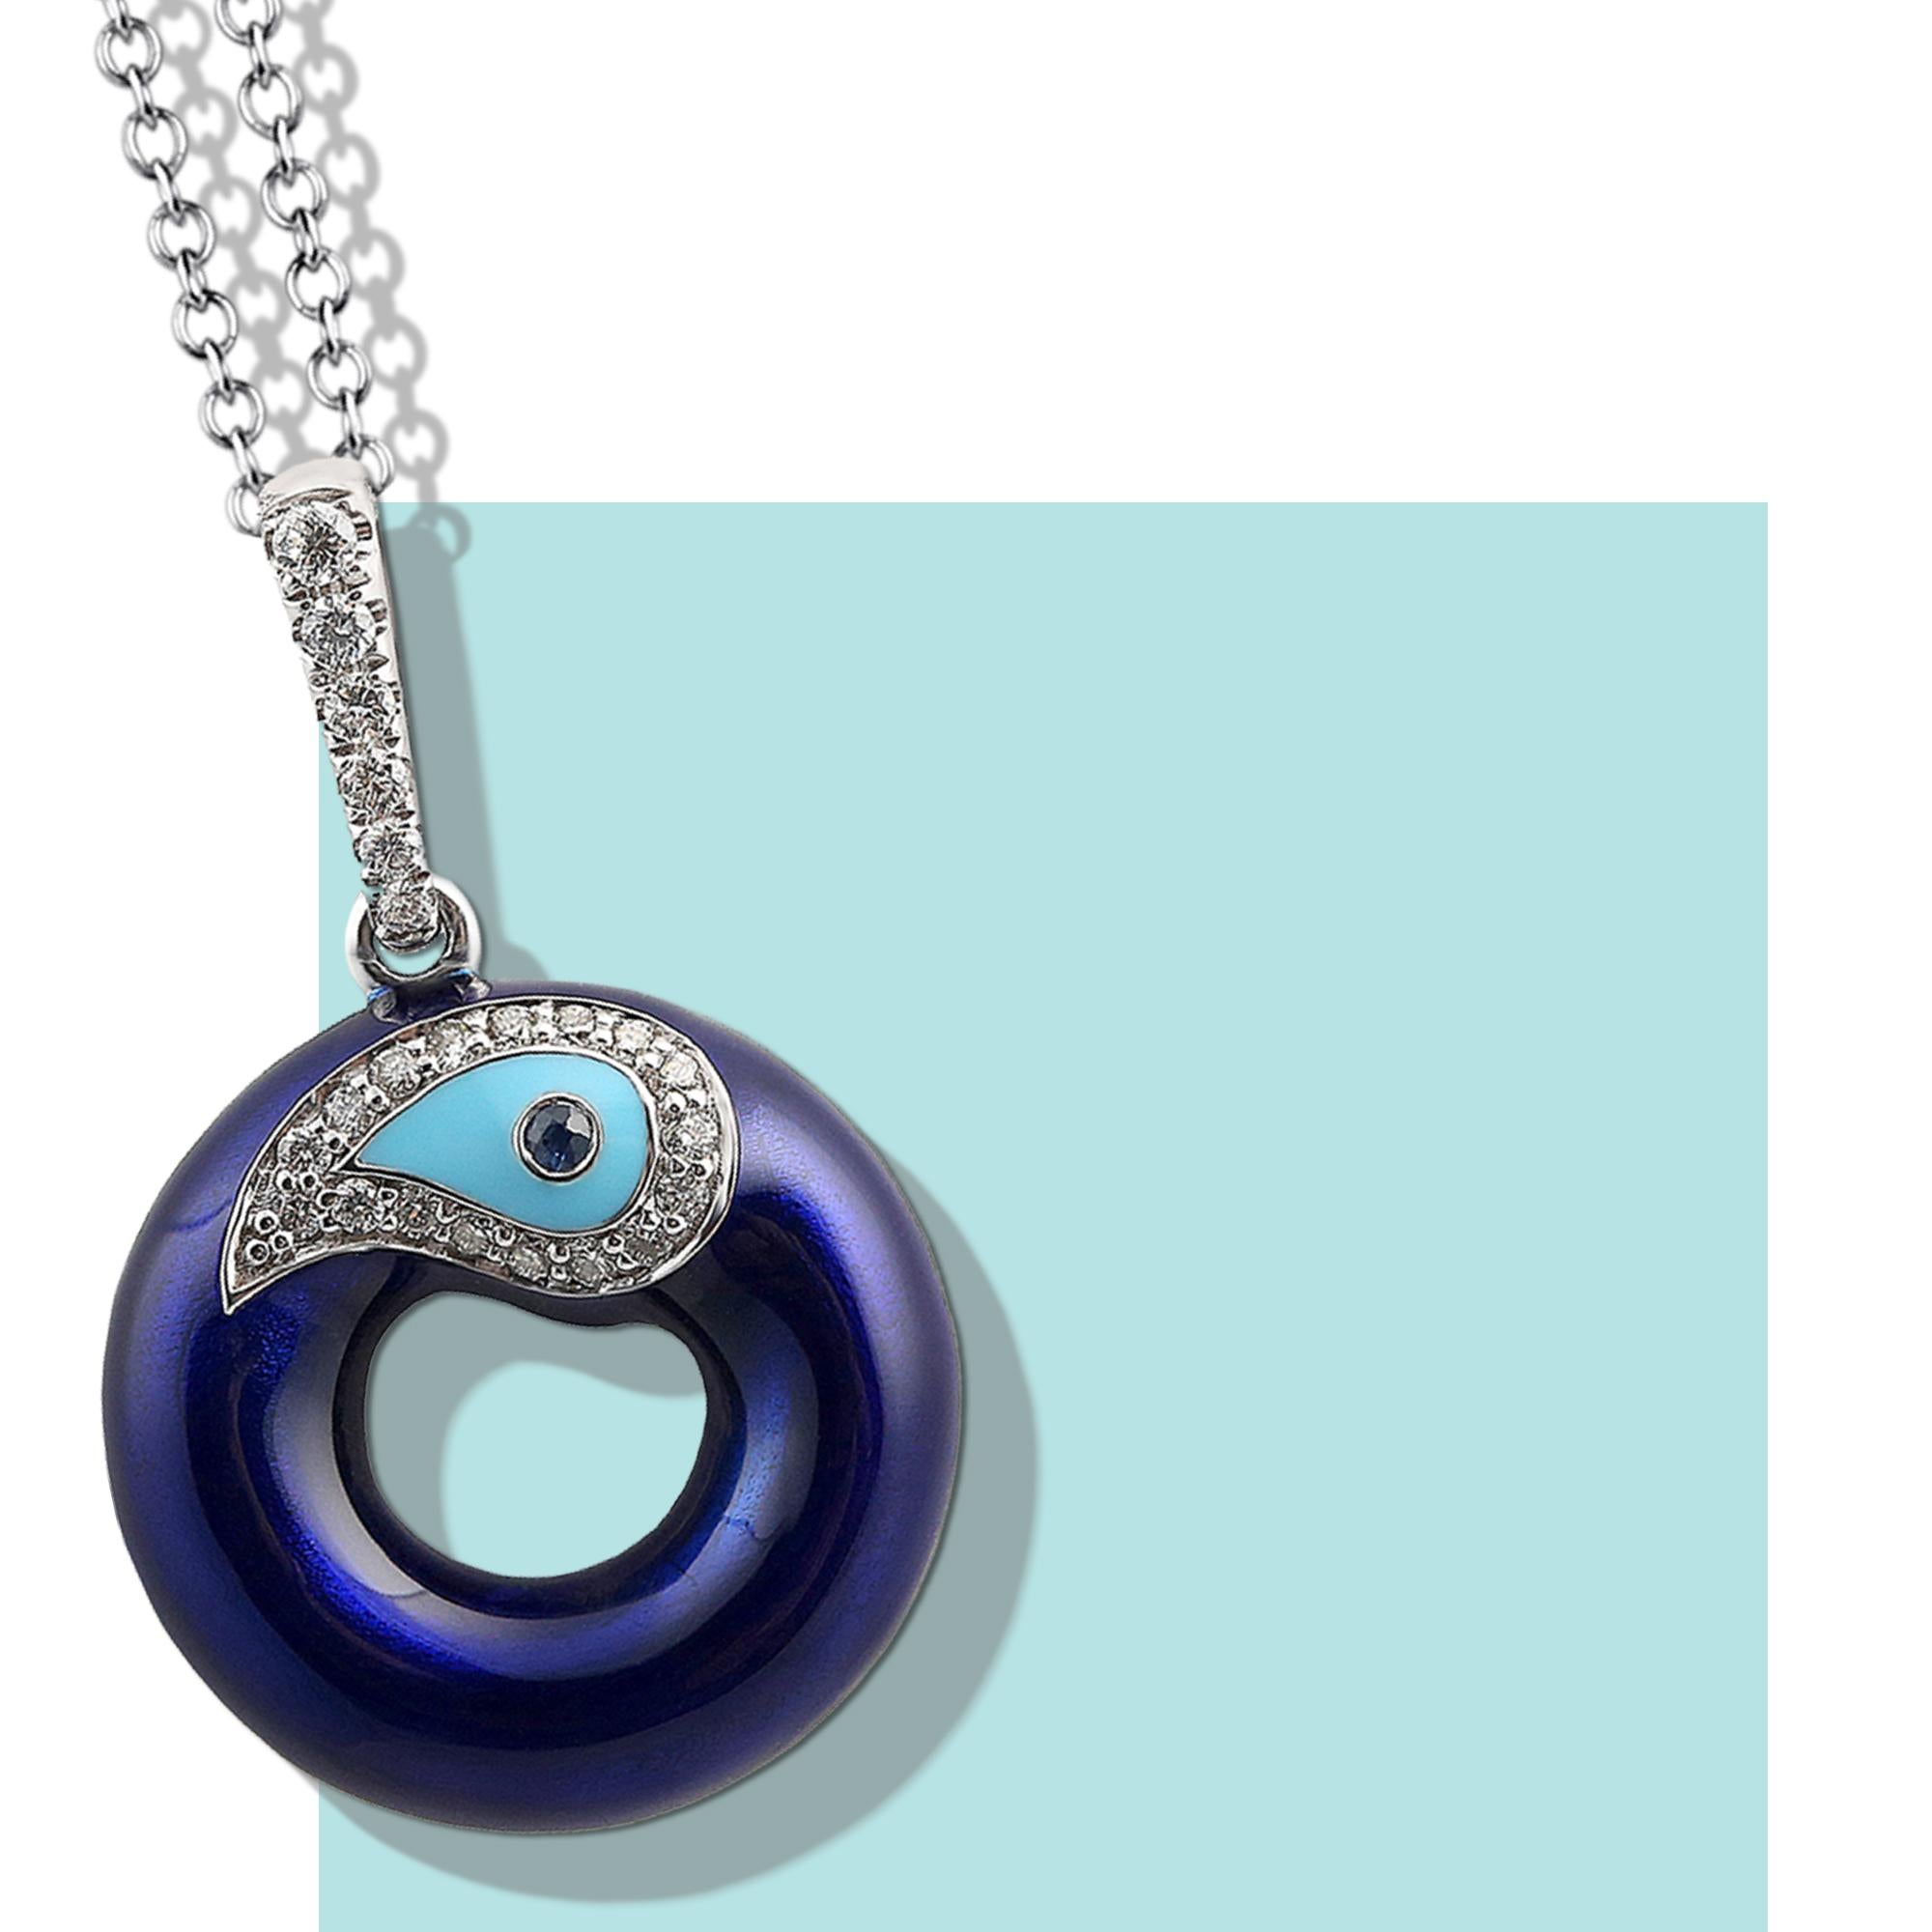 Nazarlique Evil Eye ID Pendant, Choose Your Letter Pendant Necklace, And Tell Your Story.
Diamond O Initial of Evil Eye Charms Allows You To Create a Personalized Necklace By Adding Your Love Letters.

* 14K White Gold Enamel Initial ‘O’ Pendant
*